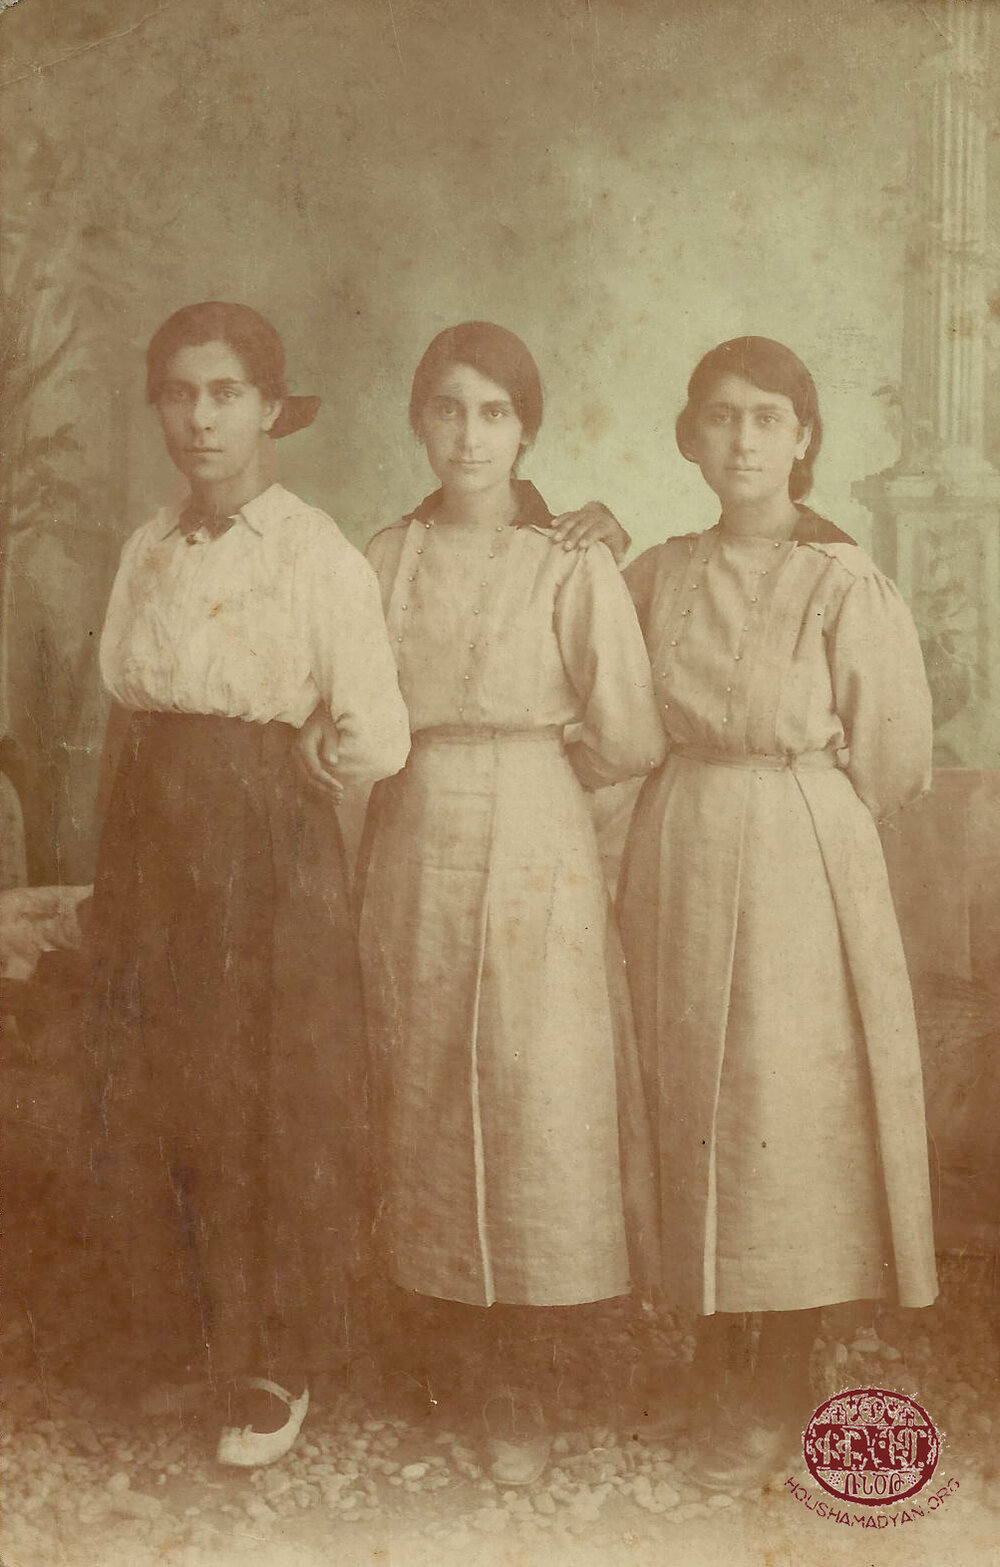 Three sisters from Sis photographed in Adana, ca 1919-1920